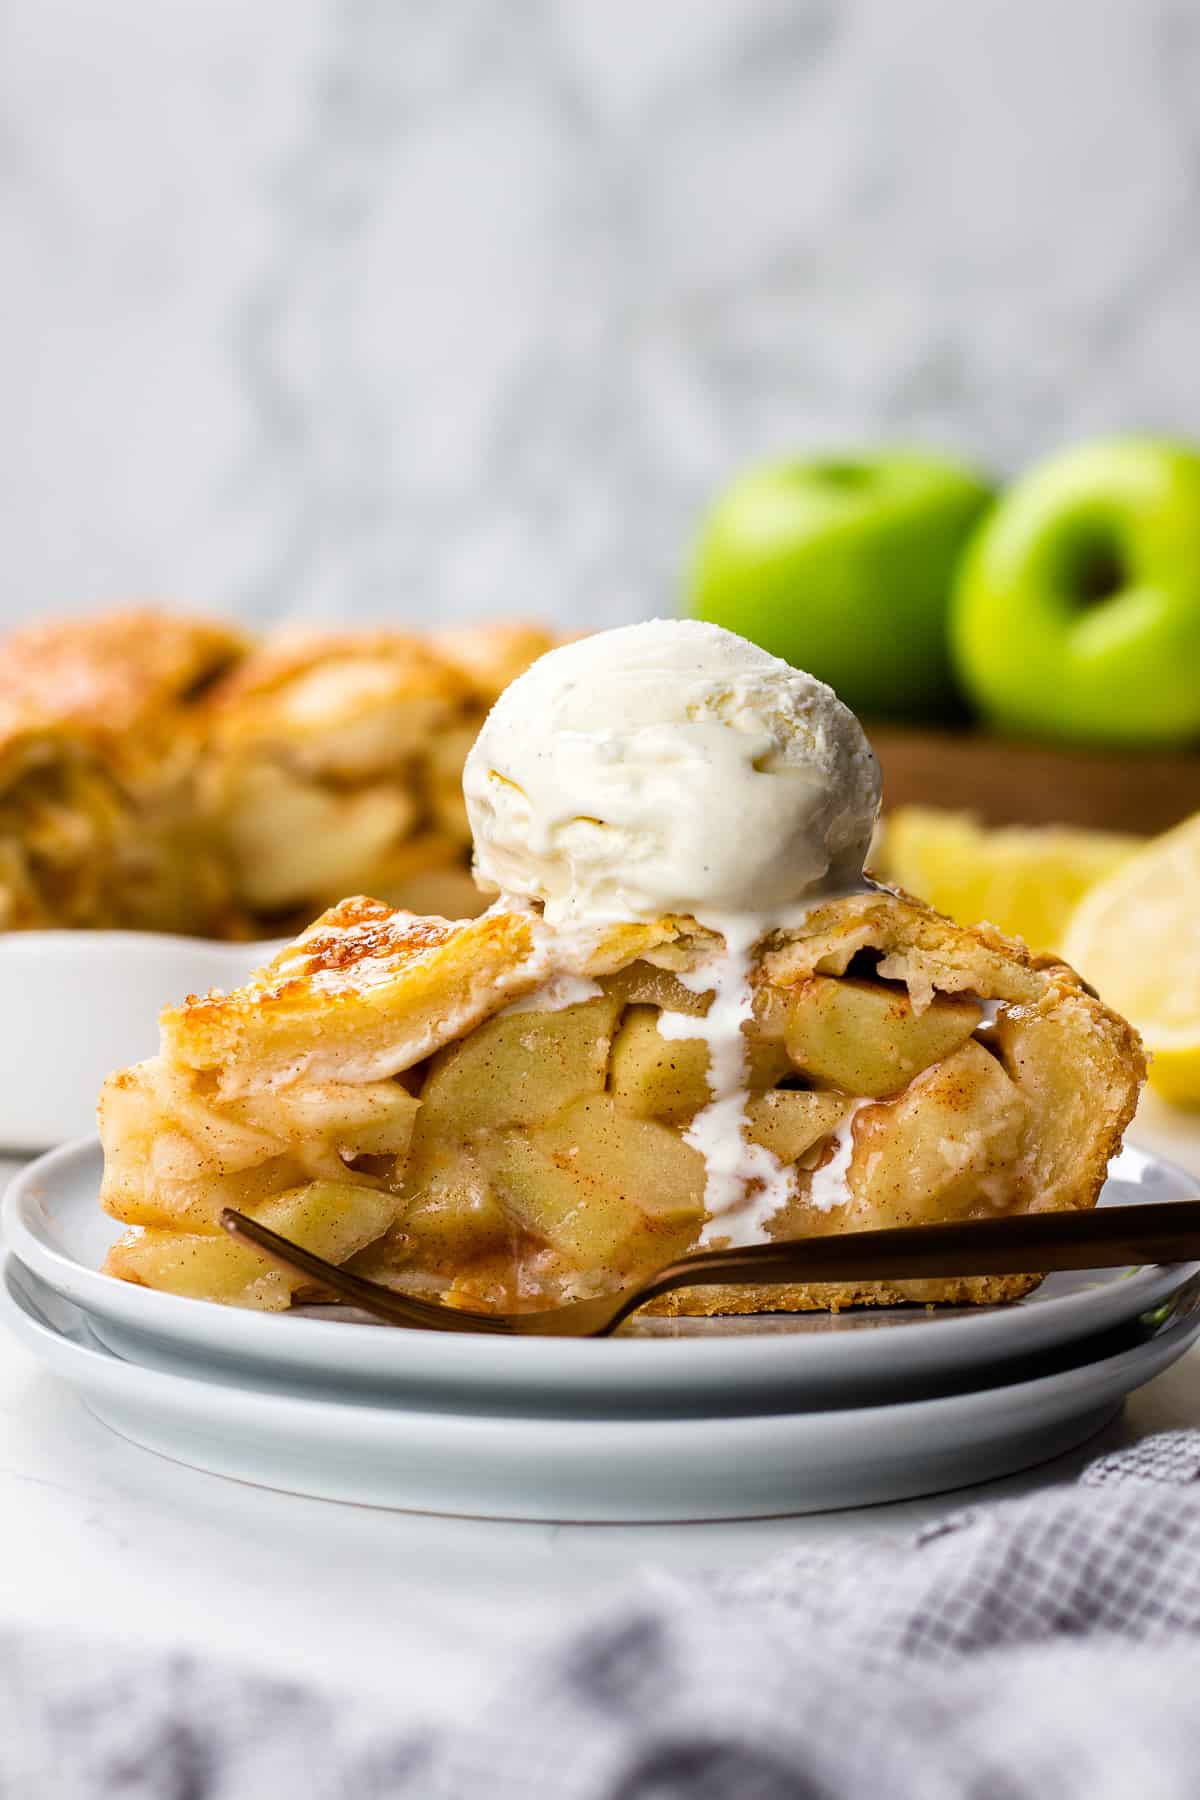 A slice of an Apple Pie wiht a scoop of ice cream on top.